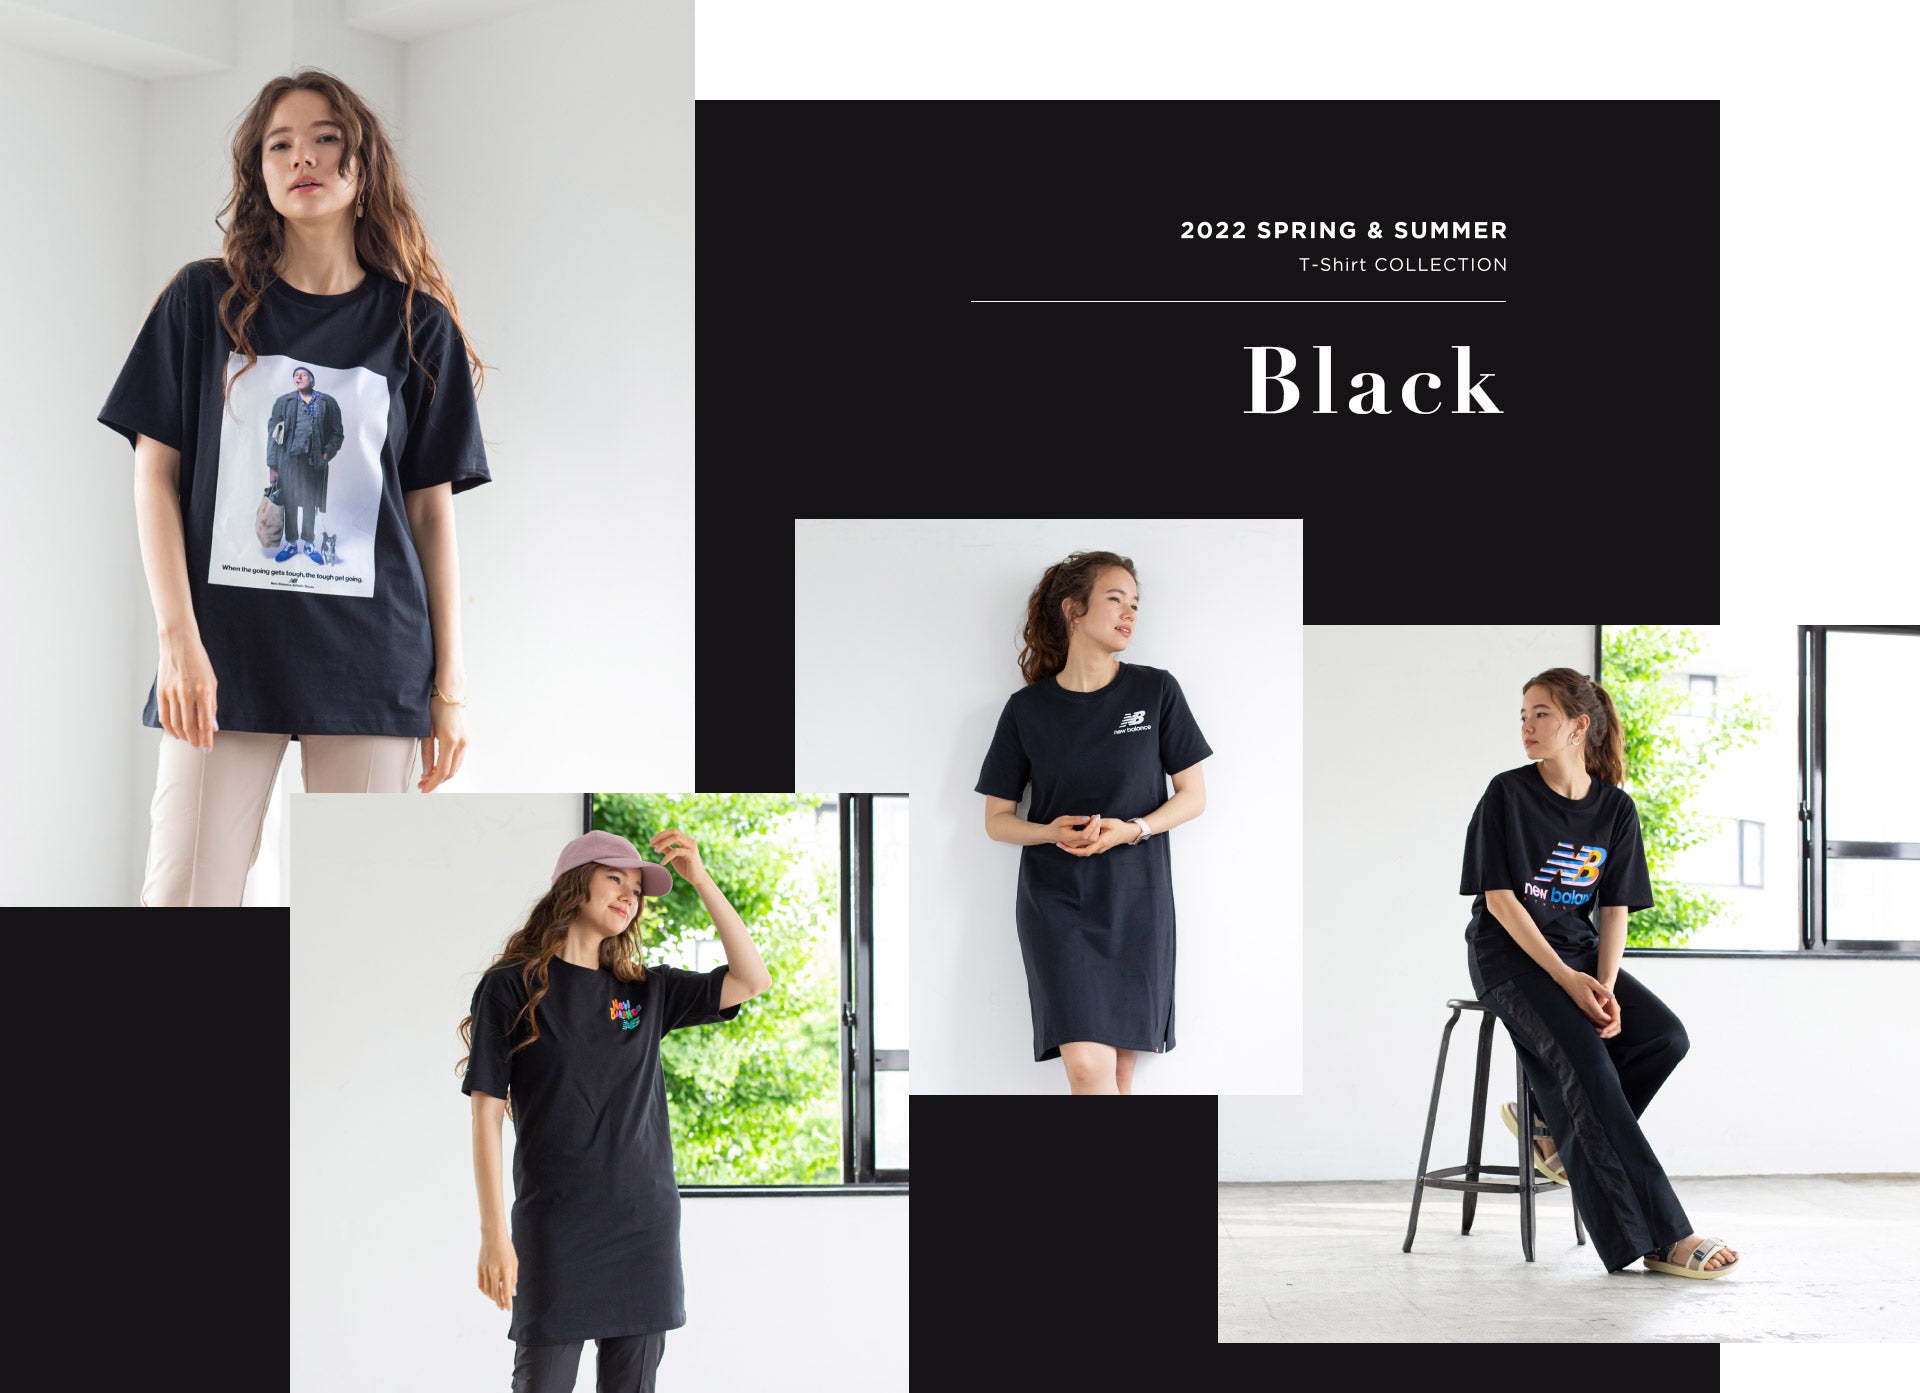 2022 Spring and Summer T-Shirt Collection, Black